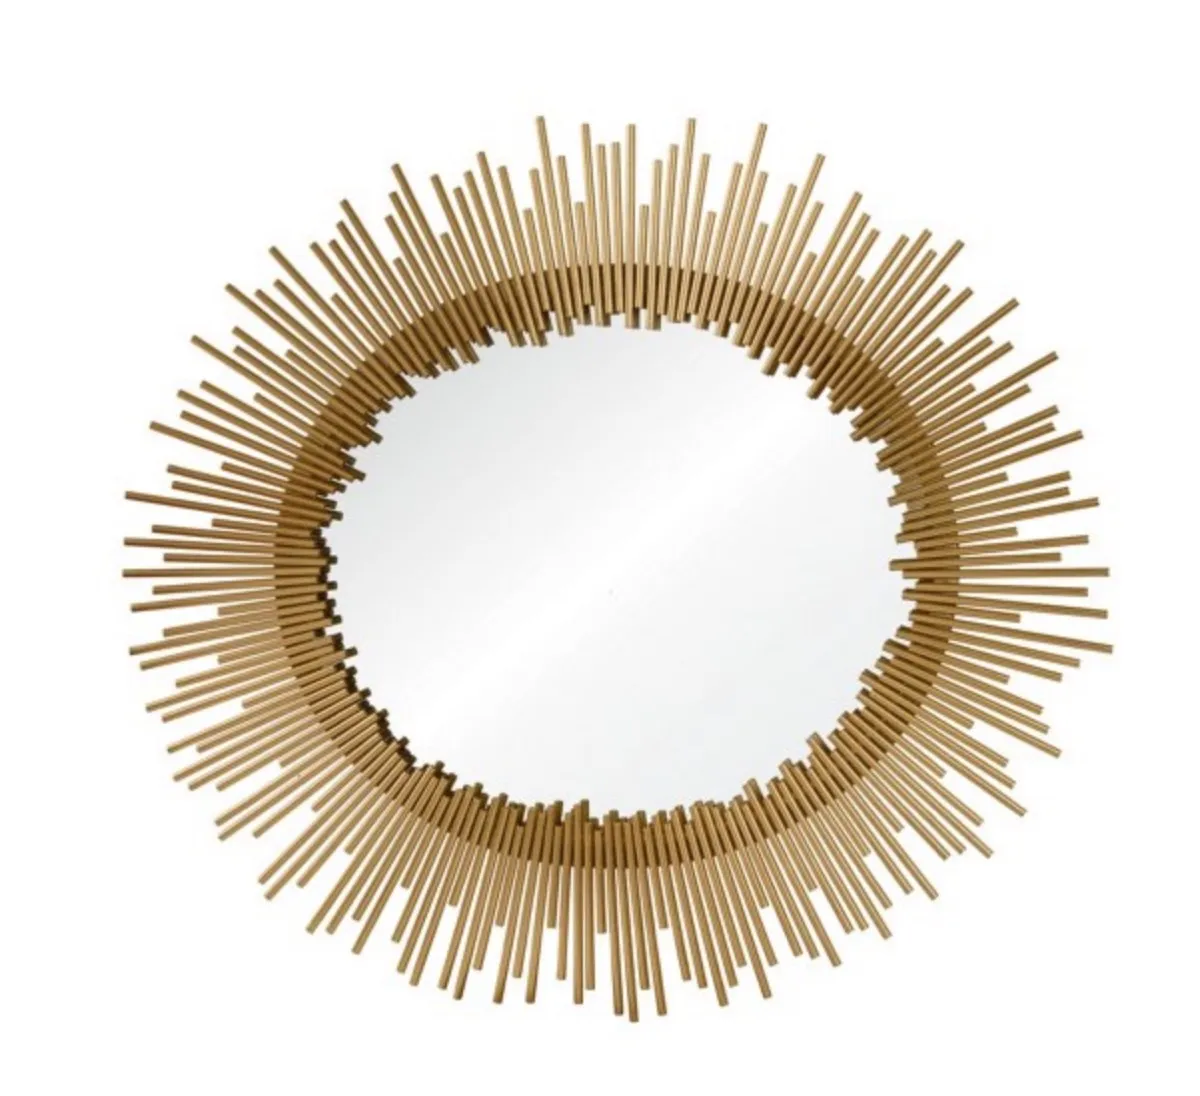 gold starburst mirror, old fashioned home items